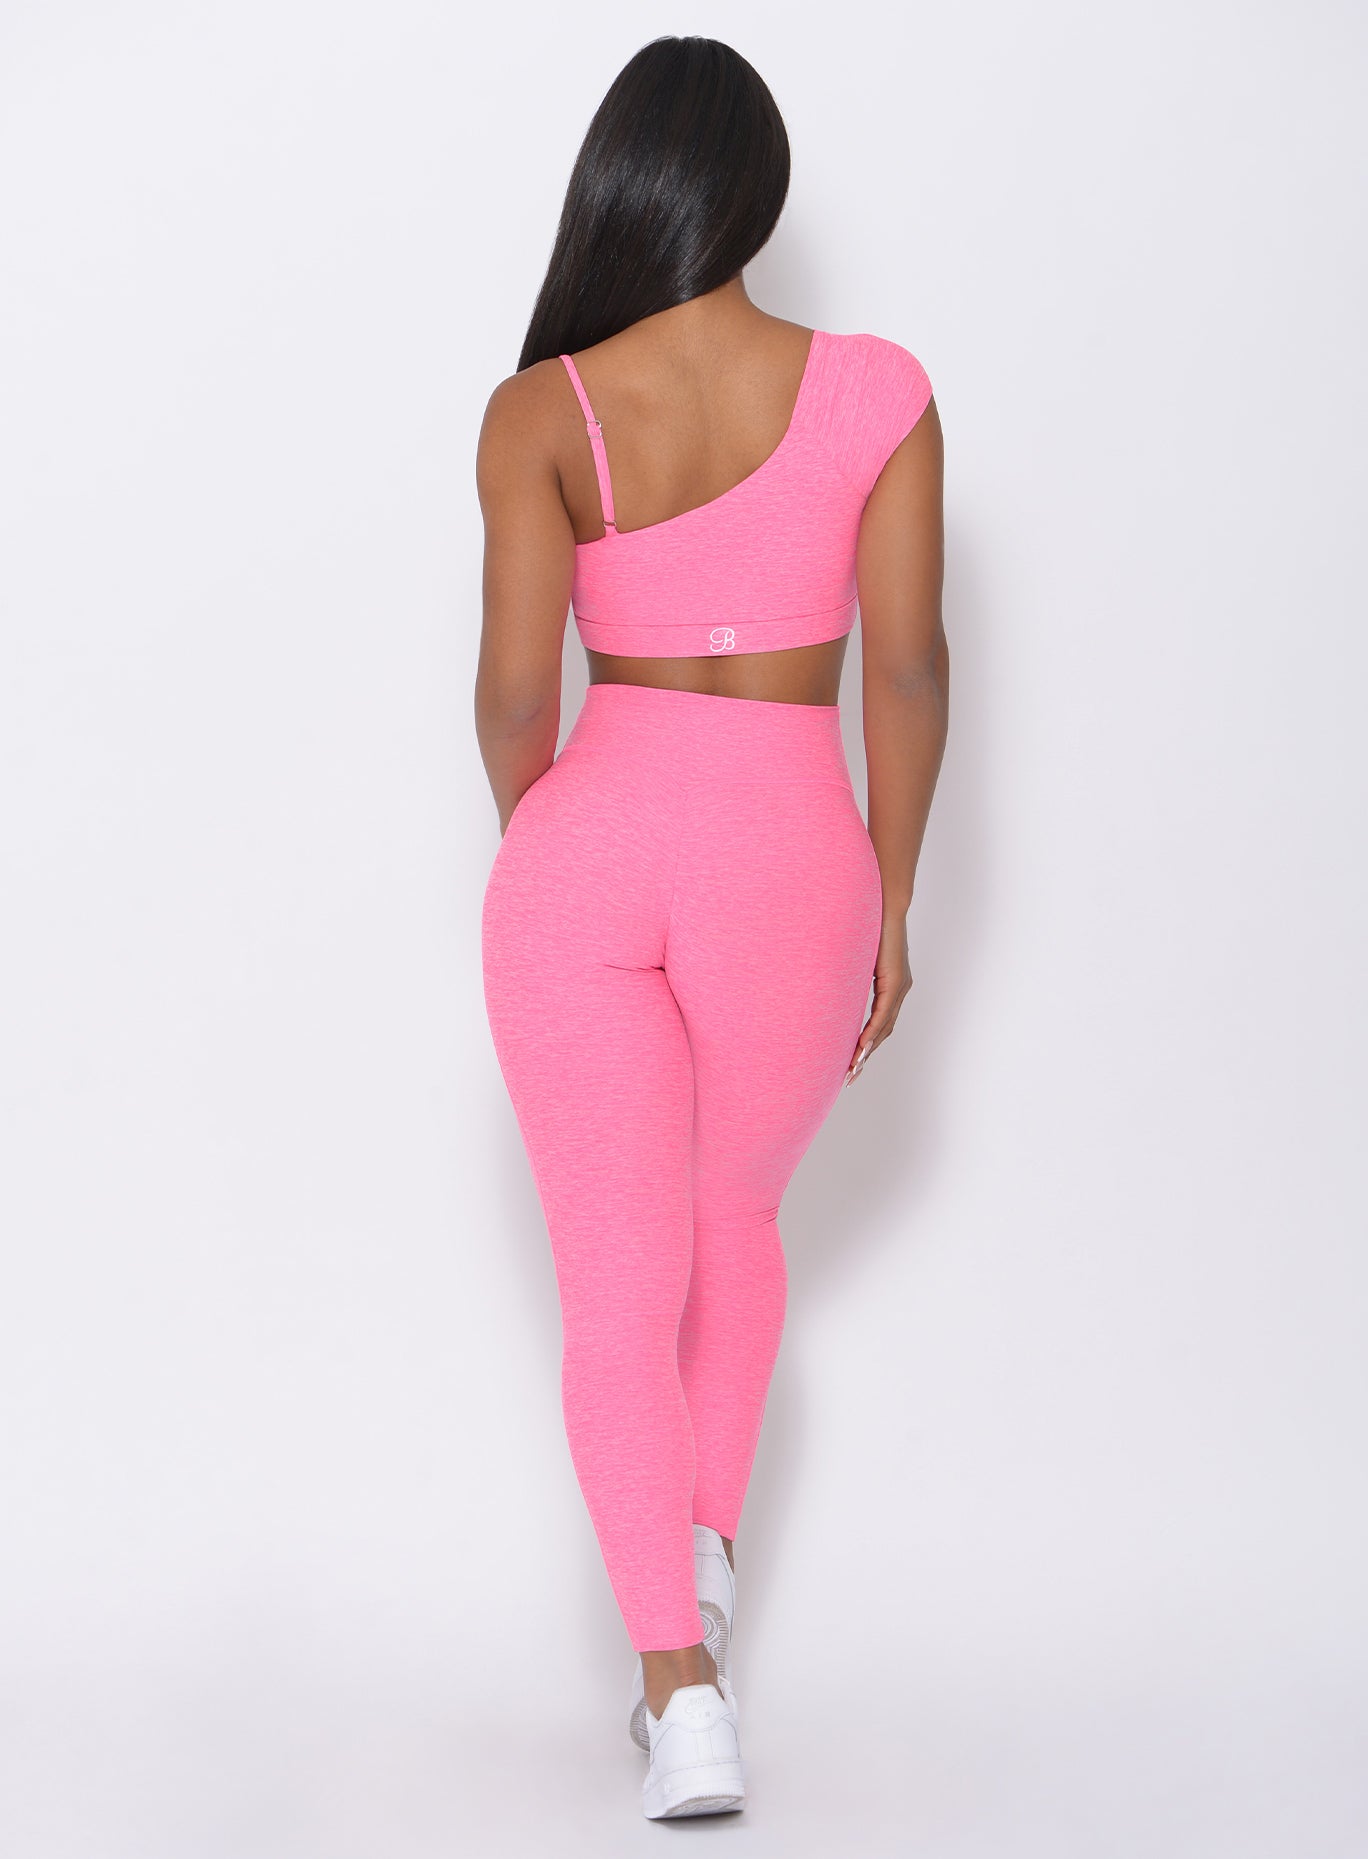 Picture of the back of the model in our pink fit leggings and a matching top